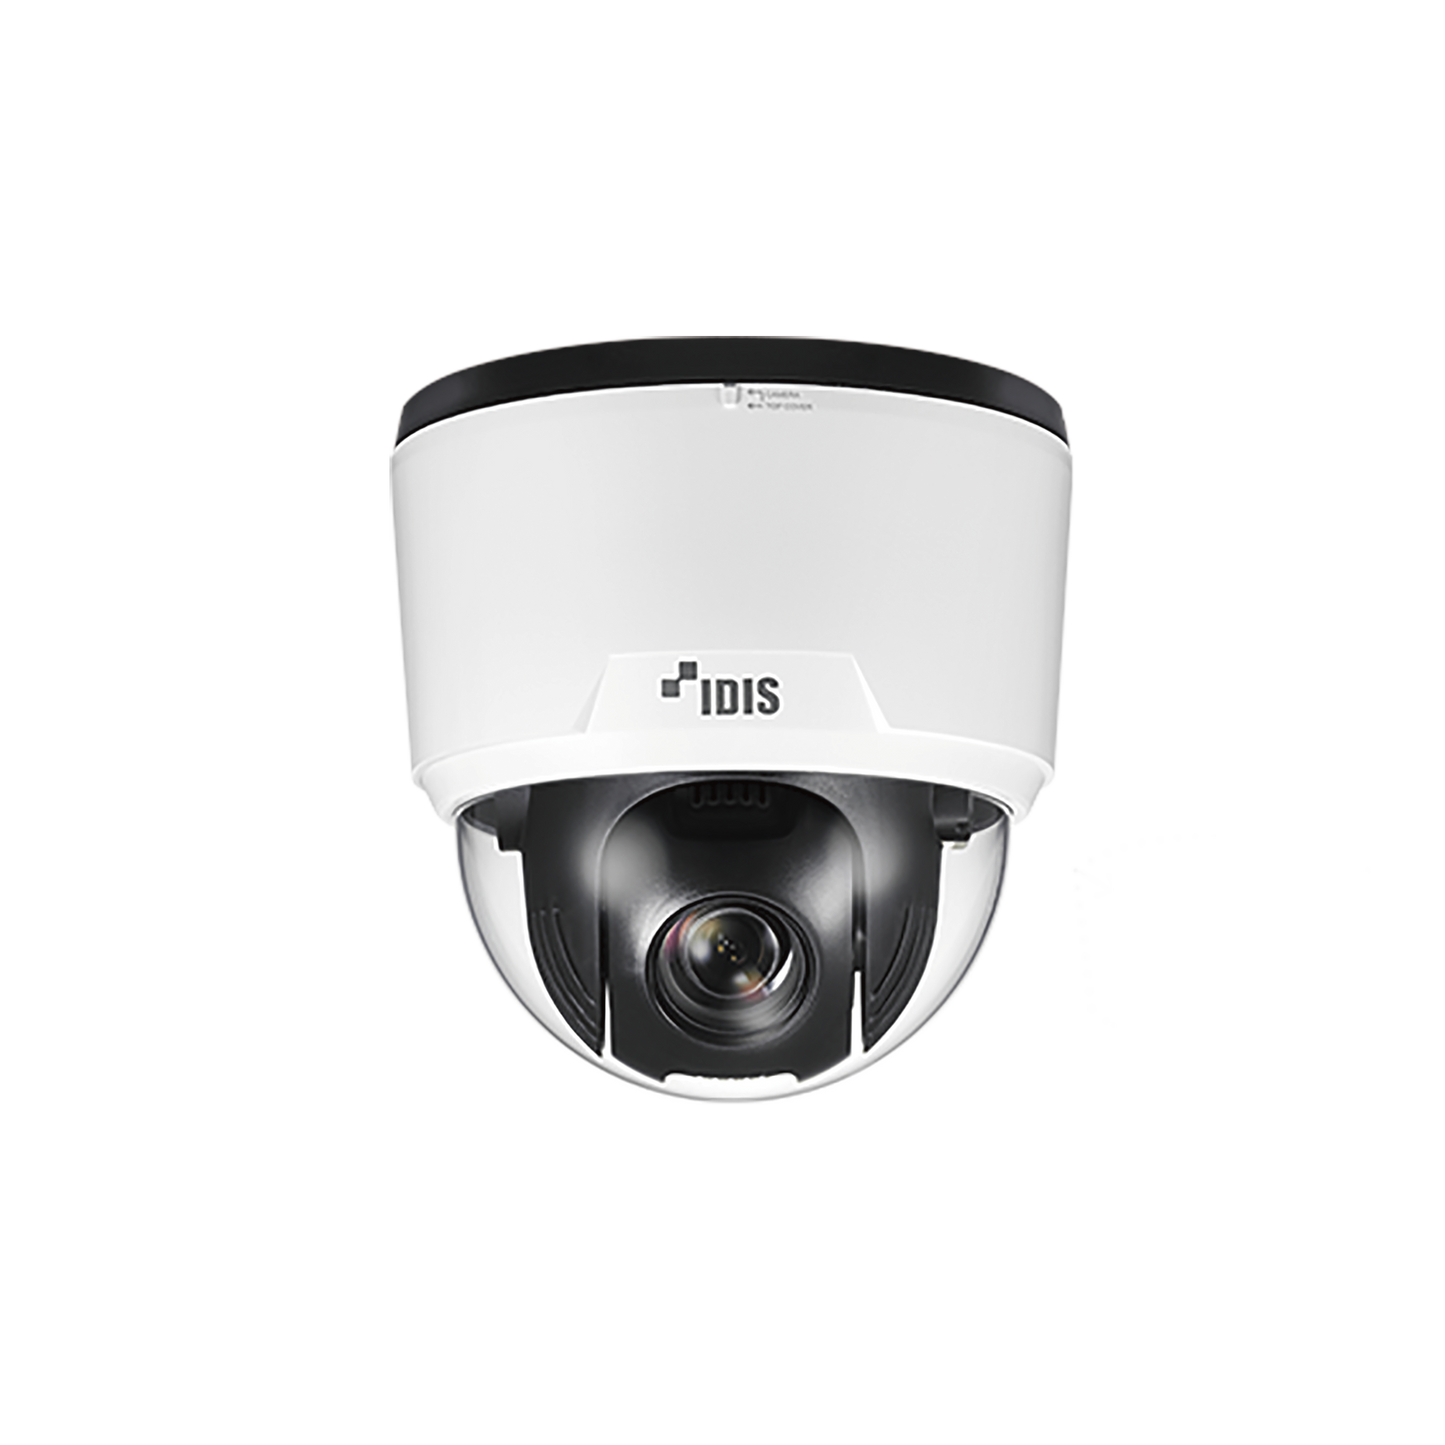 Full HD 12x PTZ Camera | AF Optical Zoom Lens (5.3 - 64mm) | 12x Zoom | Day and Night (ICR) True WDR | EIS | Alarm IN/OUT | PoE | NDAA Compliant